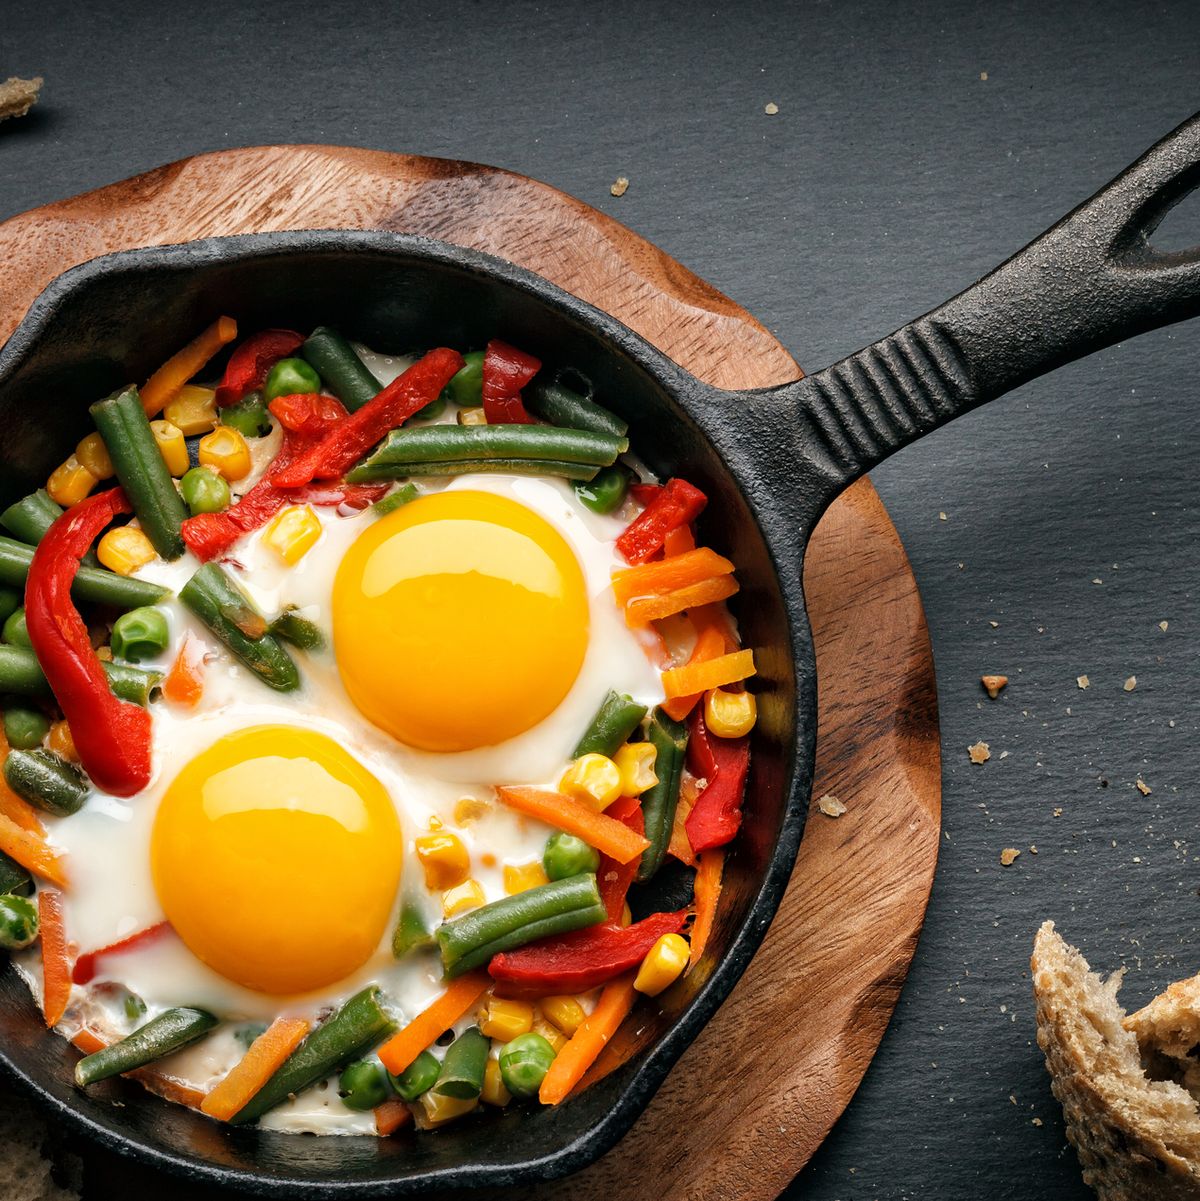 https://hips.hearstapps.com/hmg-prod/images/fried-eggs-in-a-cast-iron-royalty-free-image-1606260387.?crop=0.599xw:0.899xh;0.0721xw,0.0817xh&resize=1200:*